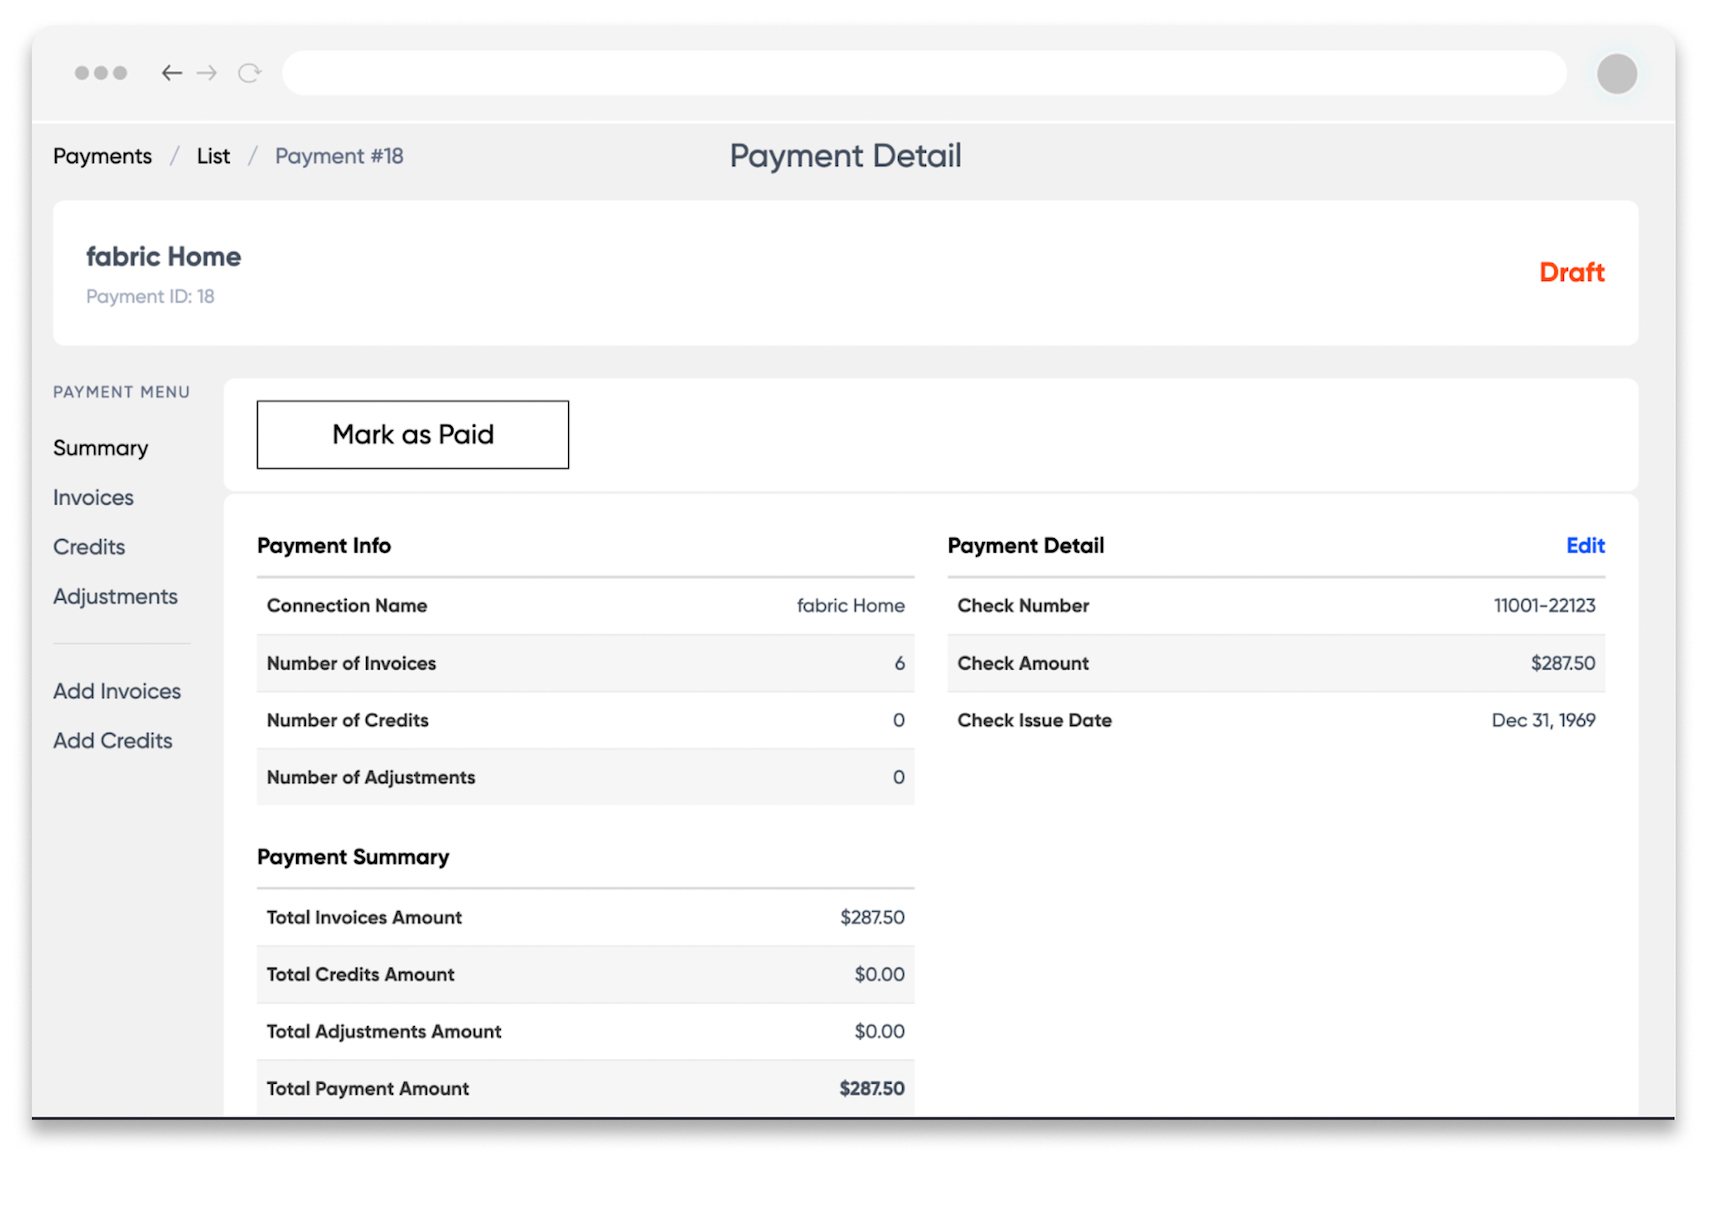 With our latest product update, merchants can now manage vendor payments inside fabric Marketplace.